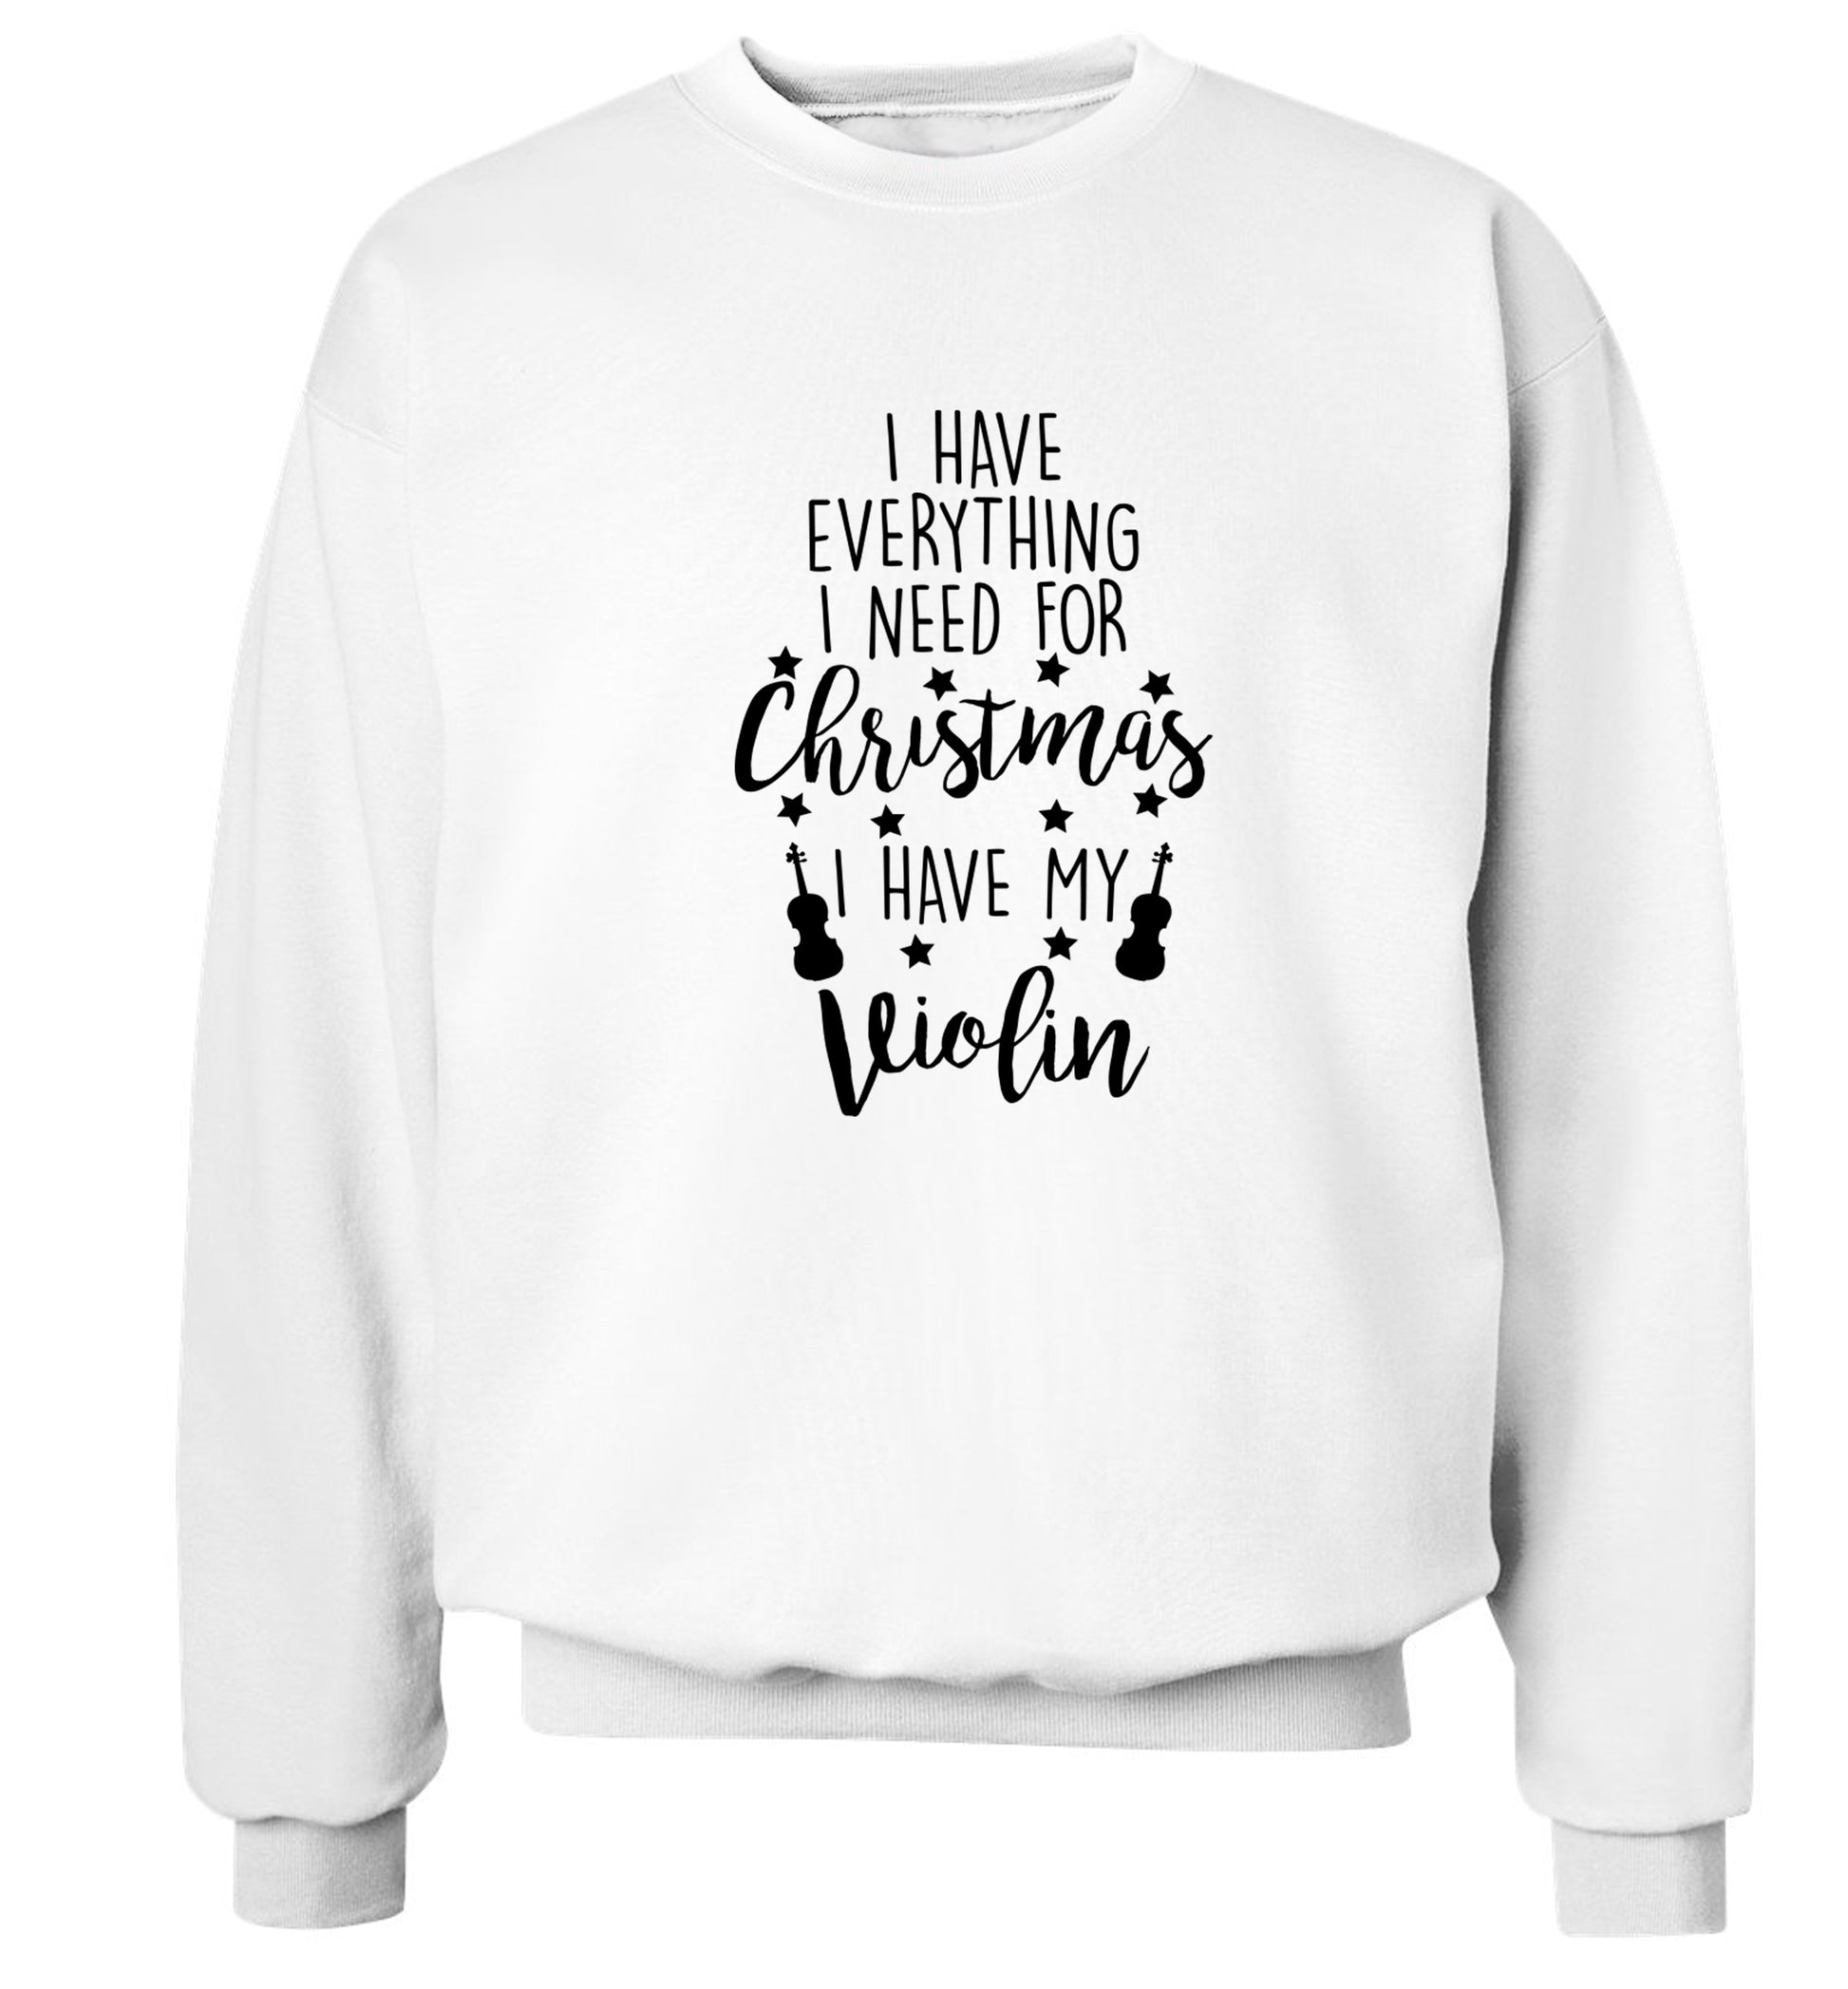 I have everything I need for Christmas I have my violin Adult's unisex white Sweater 2XL